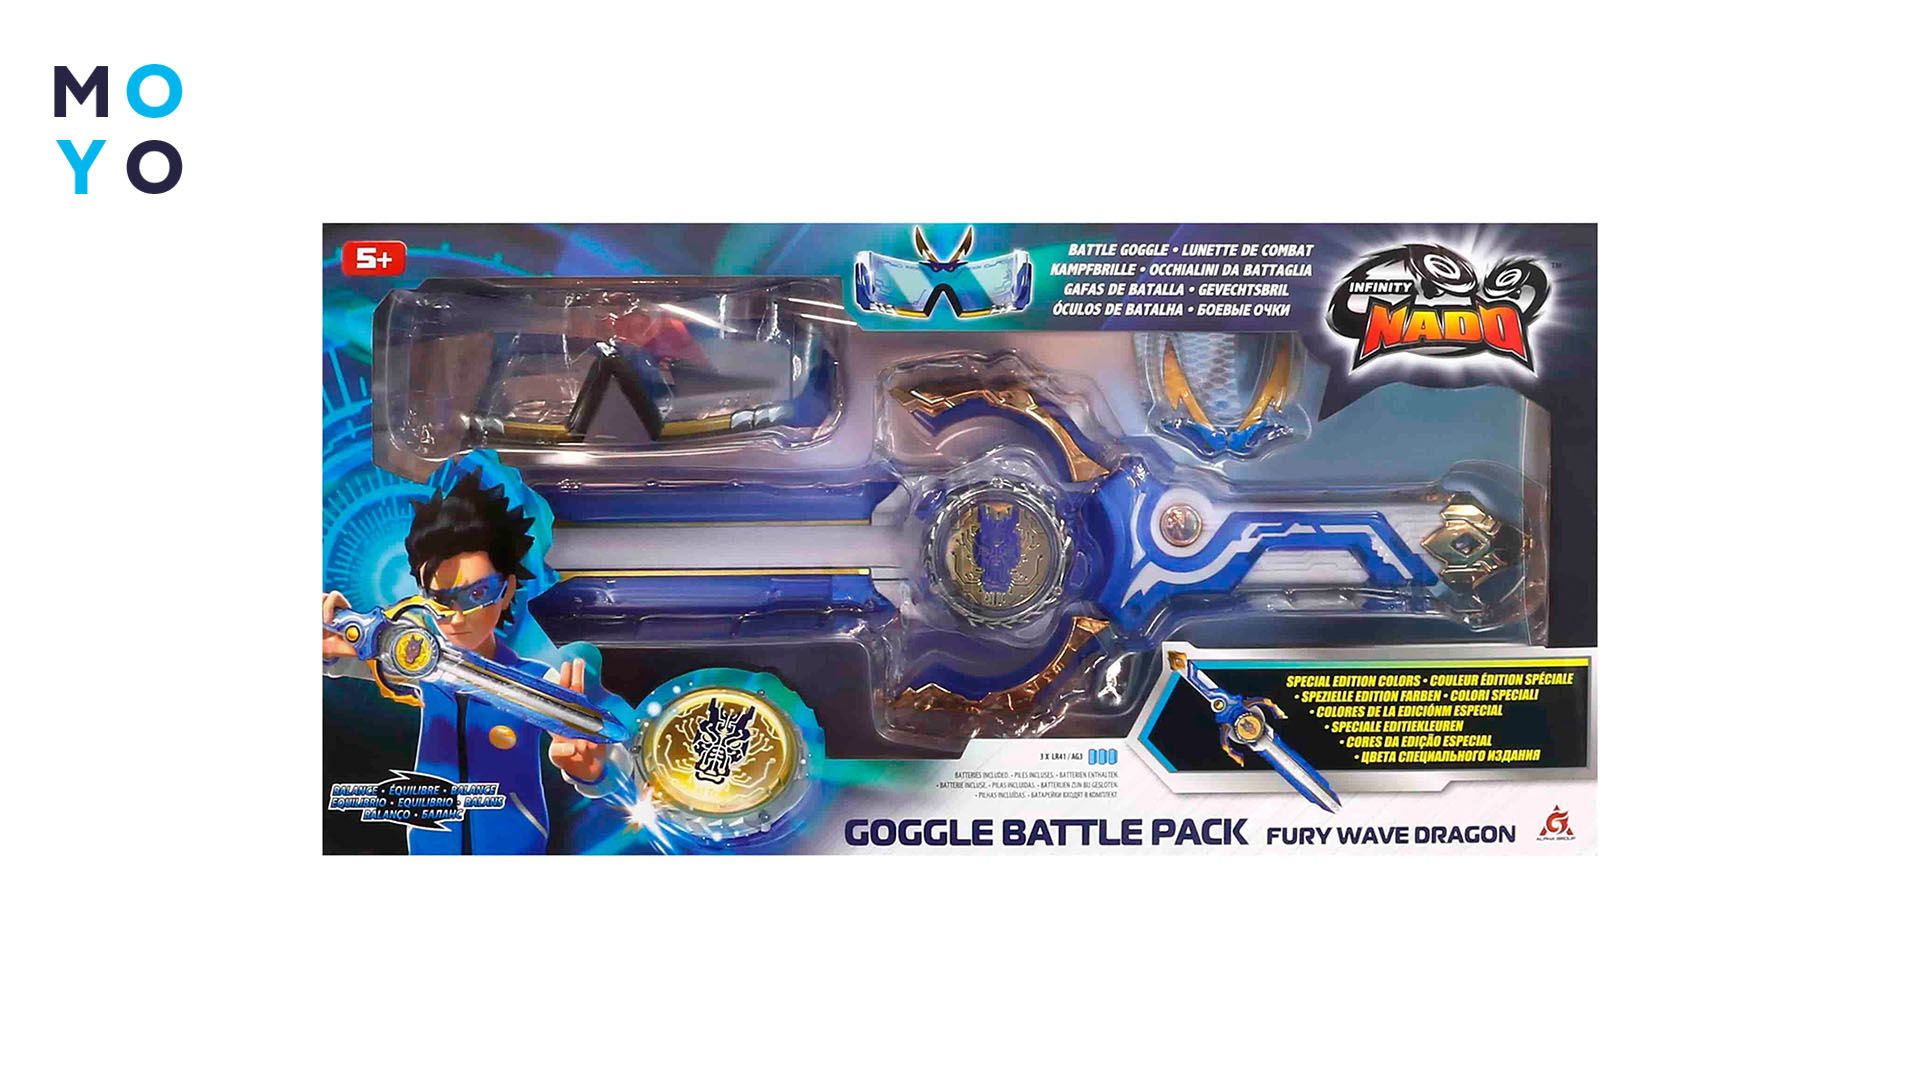 GOGGLE BATTLE PACK